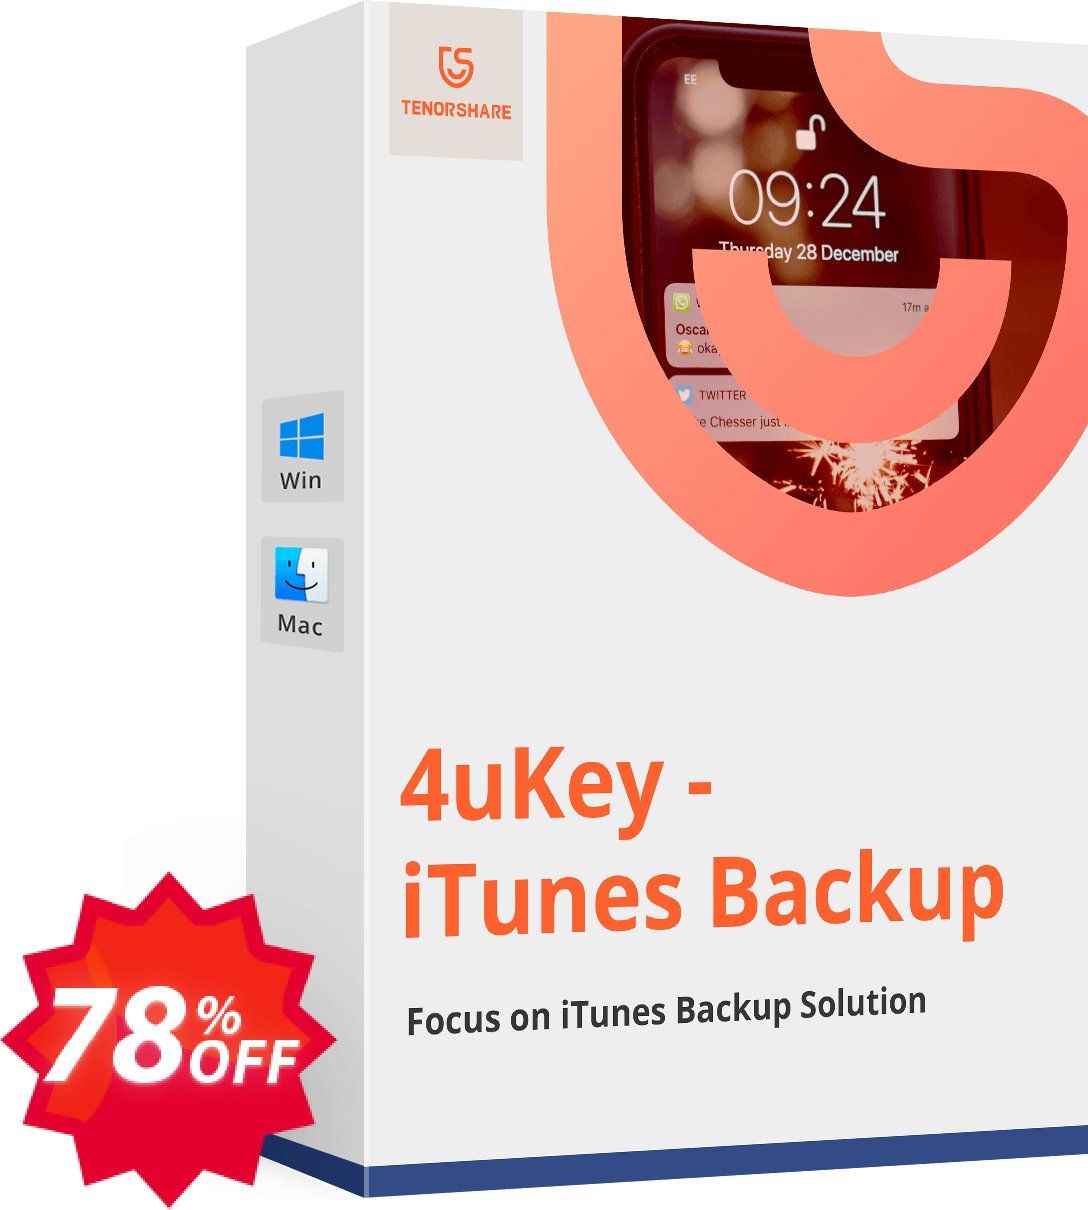 Tenorshare 4uKey iTunes Backup for MAC, Yearly Plan  Coupon code 78% discount 